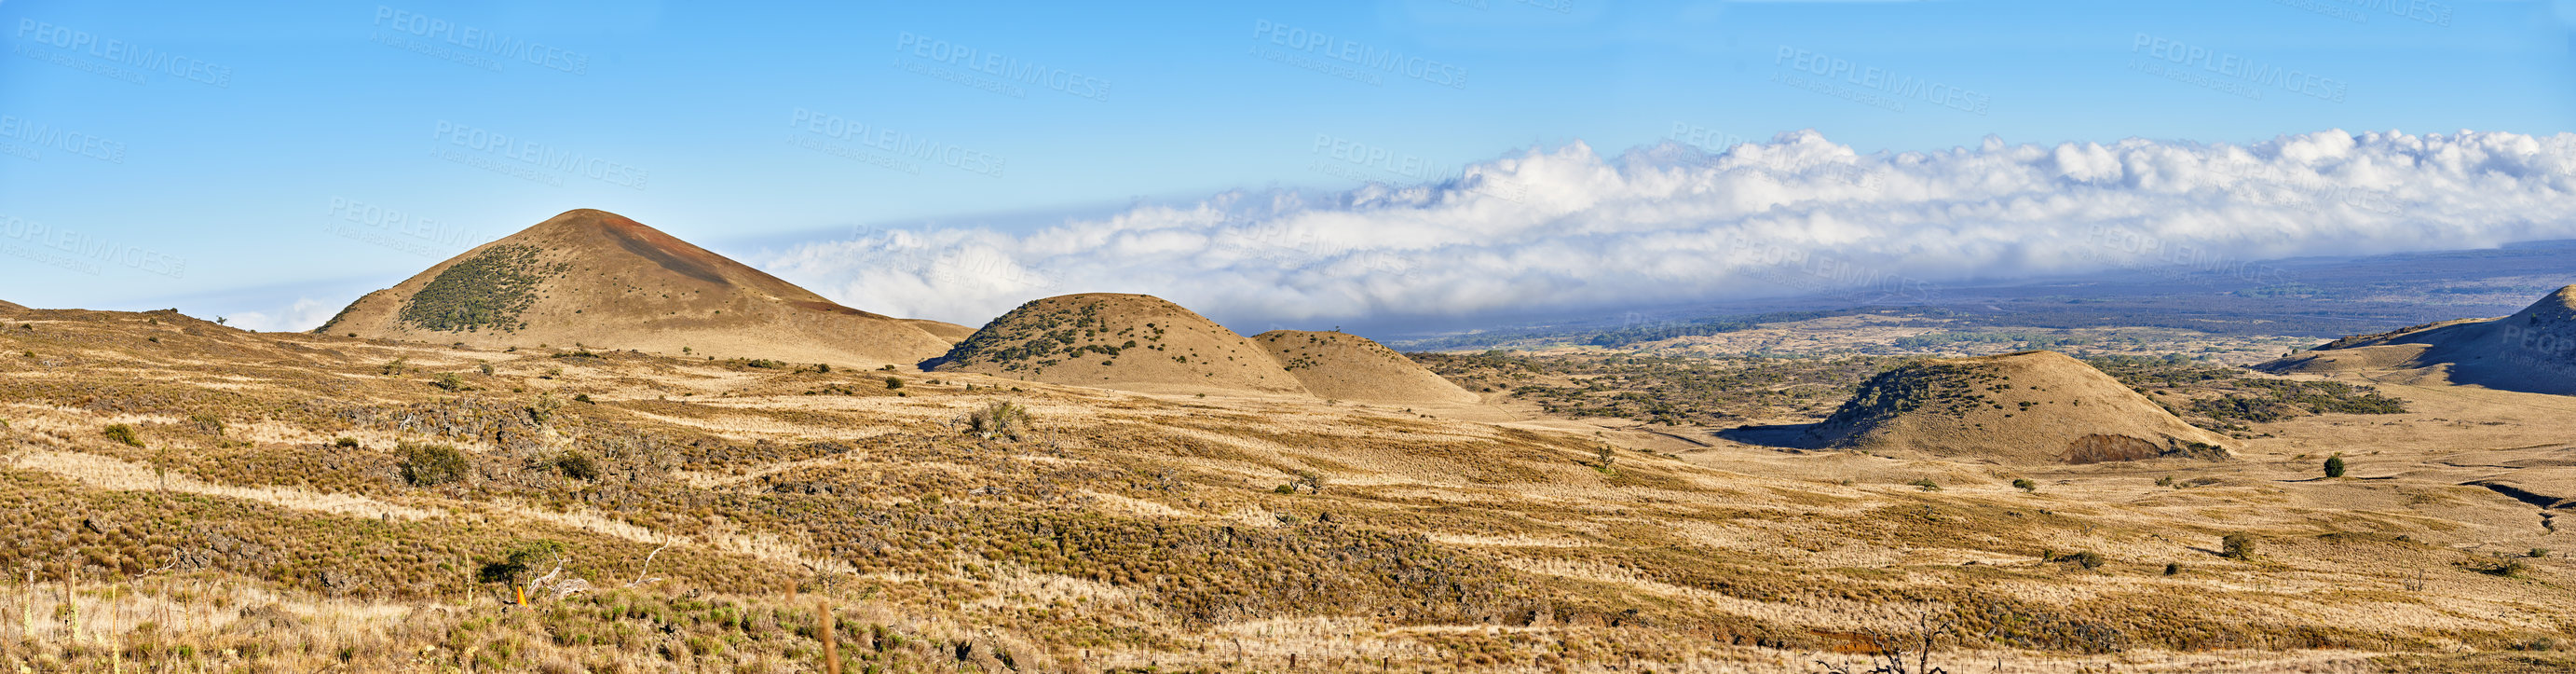 Buy stock photo panoramic view of Muana Loa,the world’s largest active volcano in Big Island, Hawaii with copyspace. Sunny day with view of The Hawaiian shield volcanoes, Earth's biggest mountains and copy space